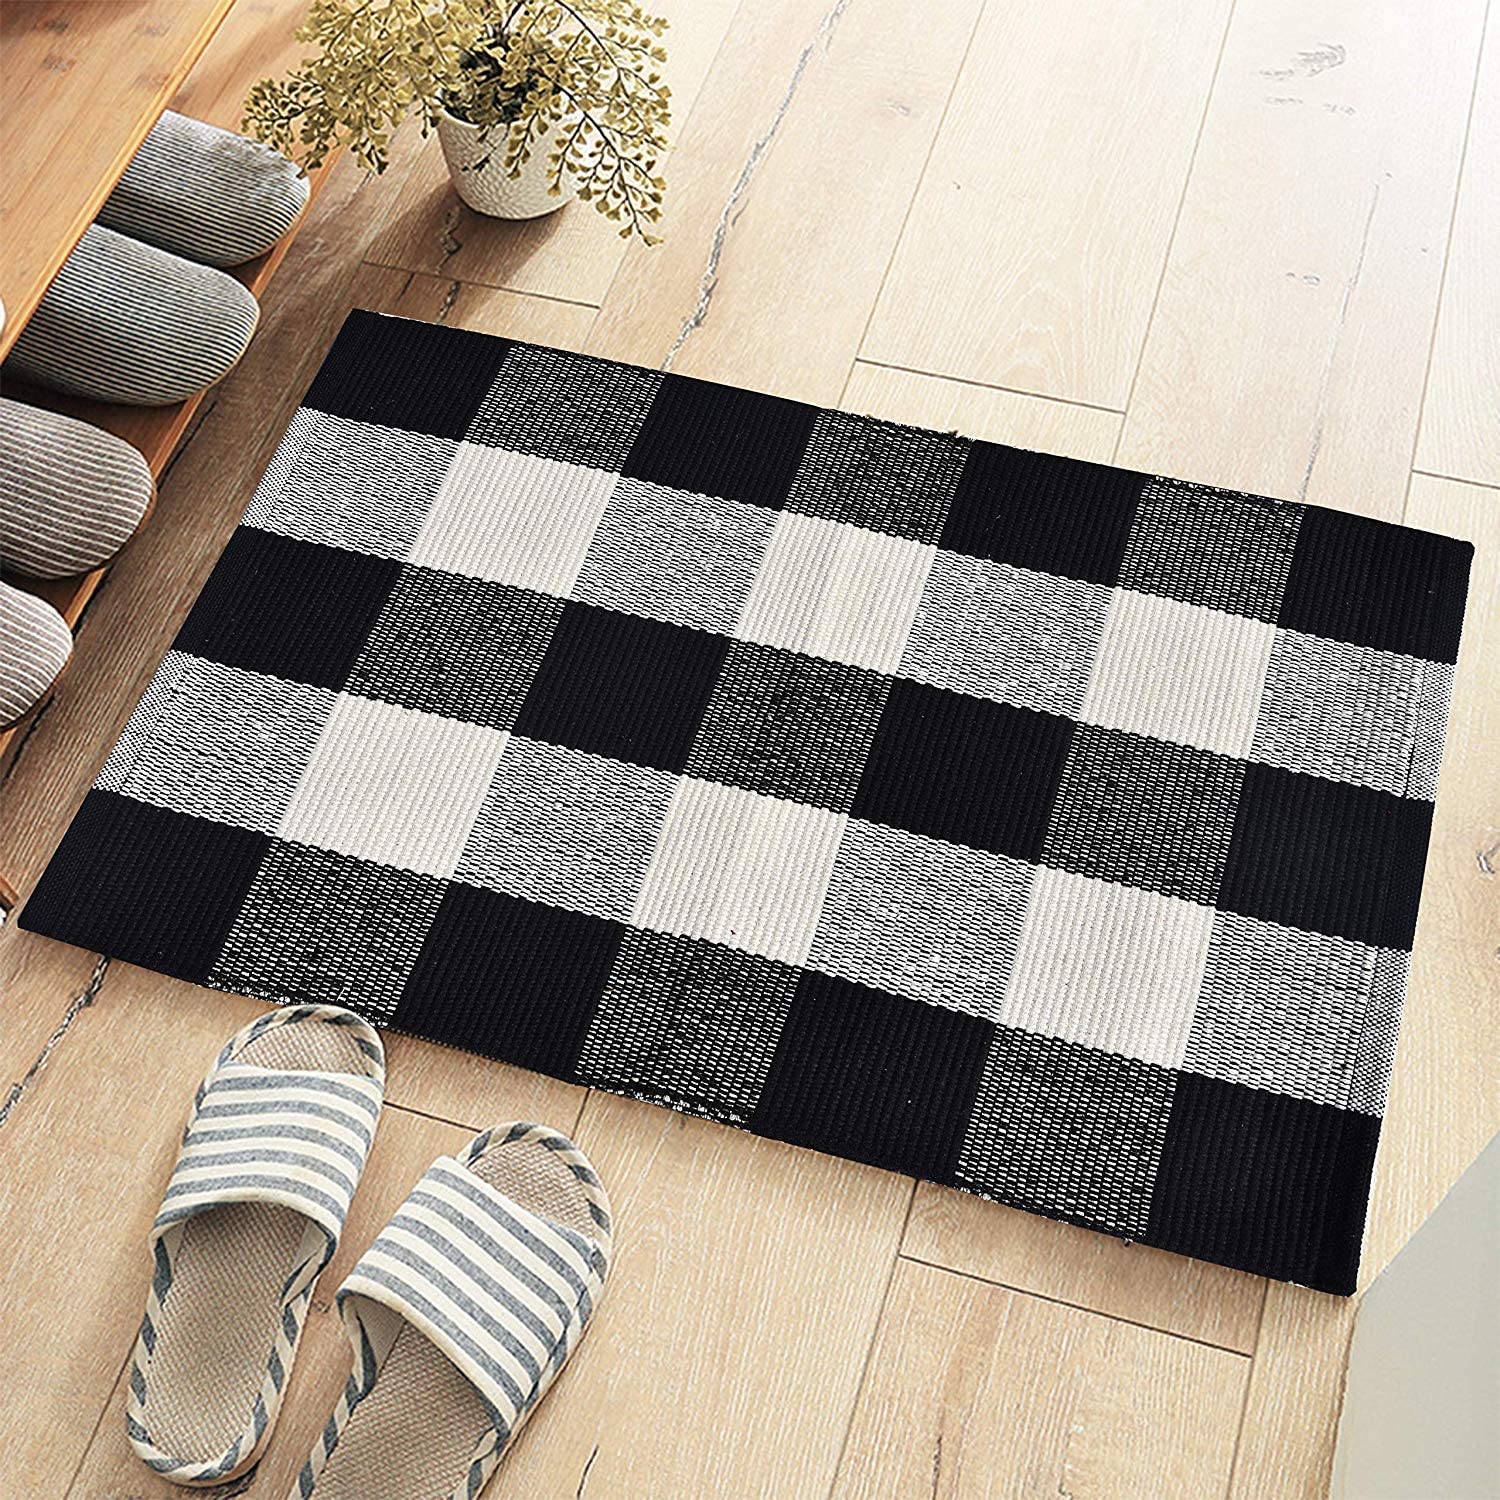 Cotton Buffalo Plaid Rugs Black and White Checkered Rug Welcome Door Mat (17.7"x27.5") Rug for Kitchen Carpet Bathroom Outdoor Porch Laundry Living Room Braided Throw Mat Washable Woven Buffalo Check - image 2 of 8